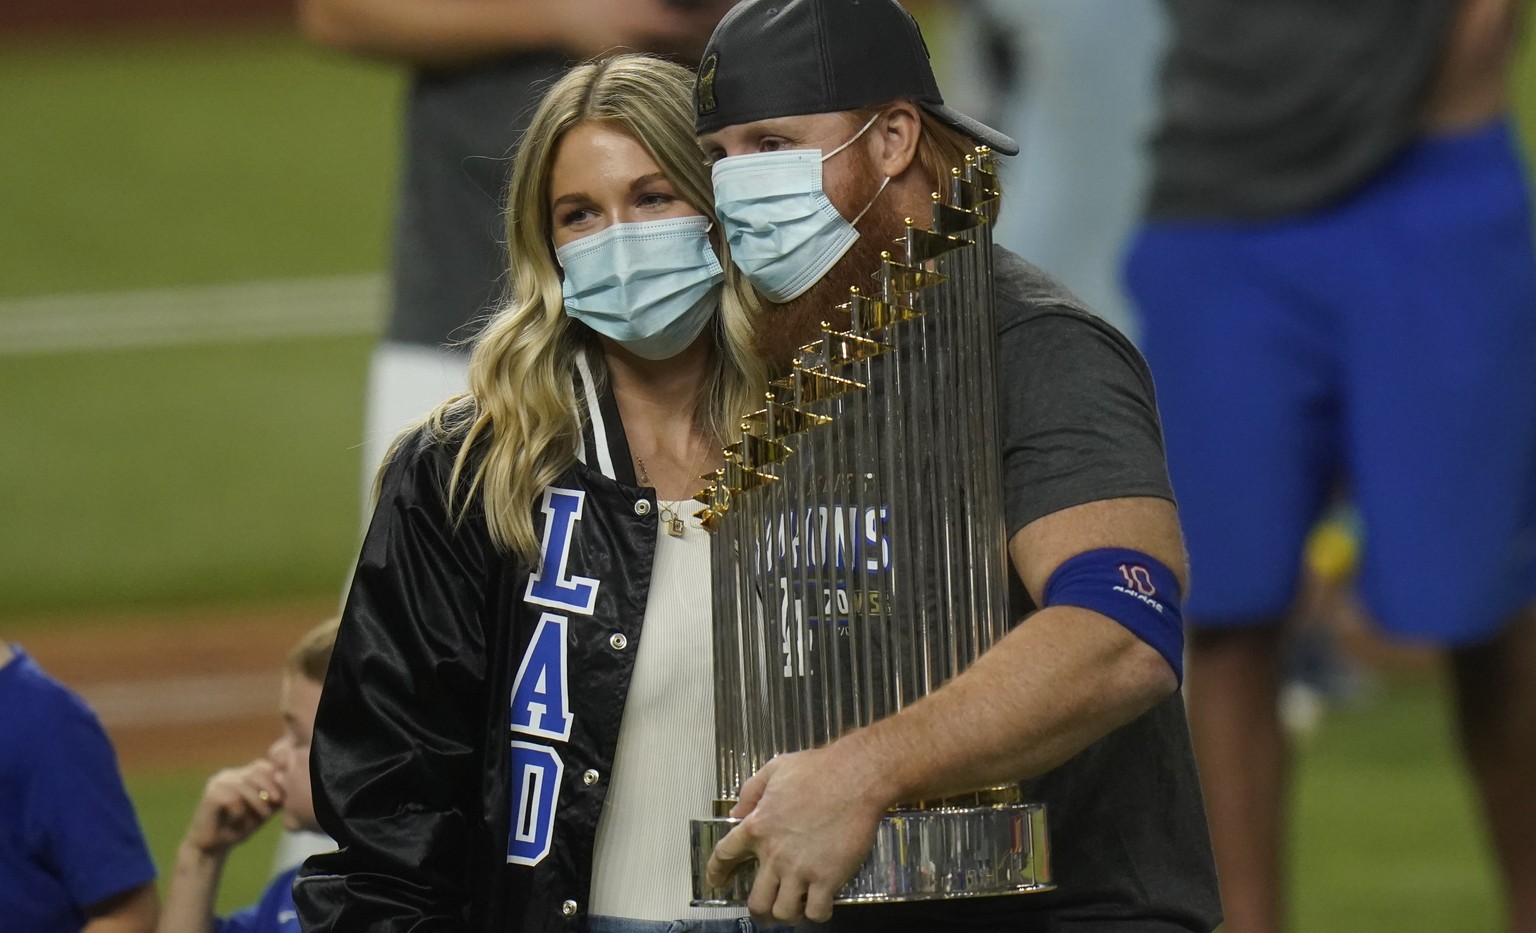 Los Angeles Dodgers third baseman Justin Turner celebrates with the trophy after defeating the Tampa Bay Rays 3-1 to win the baseball World Series in Game 6 Tuesday, Oct. 27, 2020, in Arlington, Texas ...